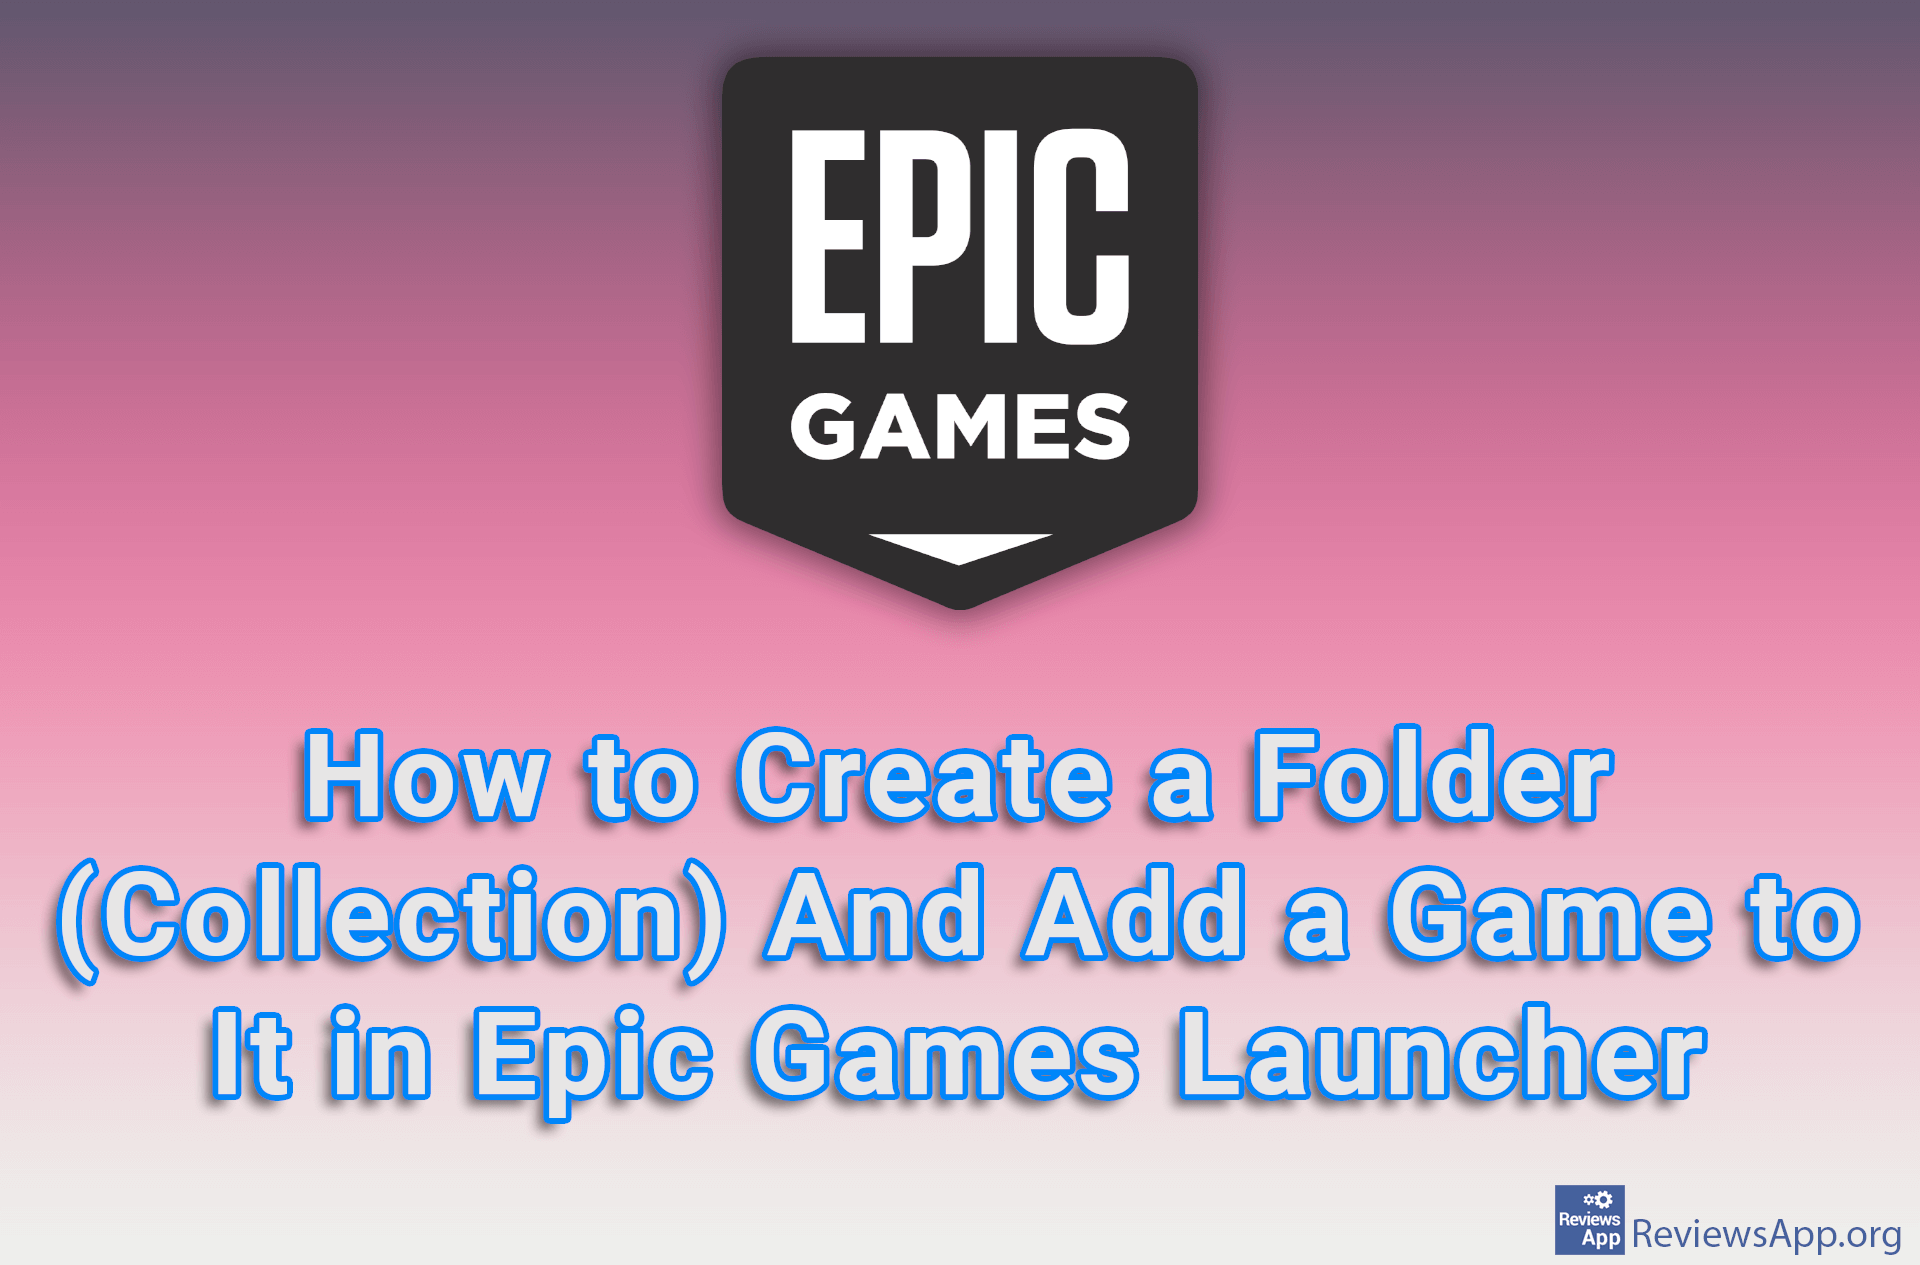 How to Create a Folder (Collection) And Add a Game to It in Epic Games Launcher